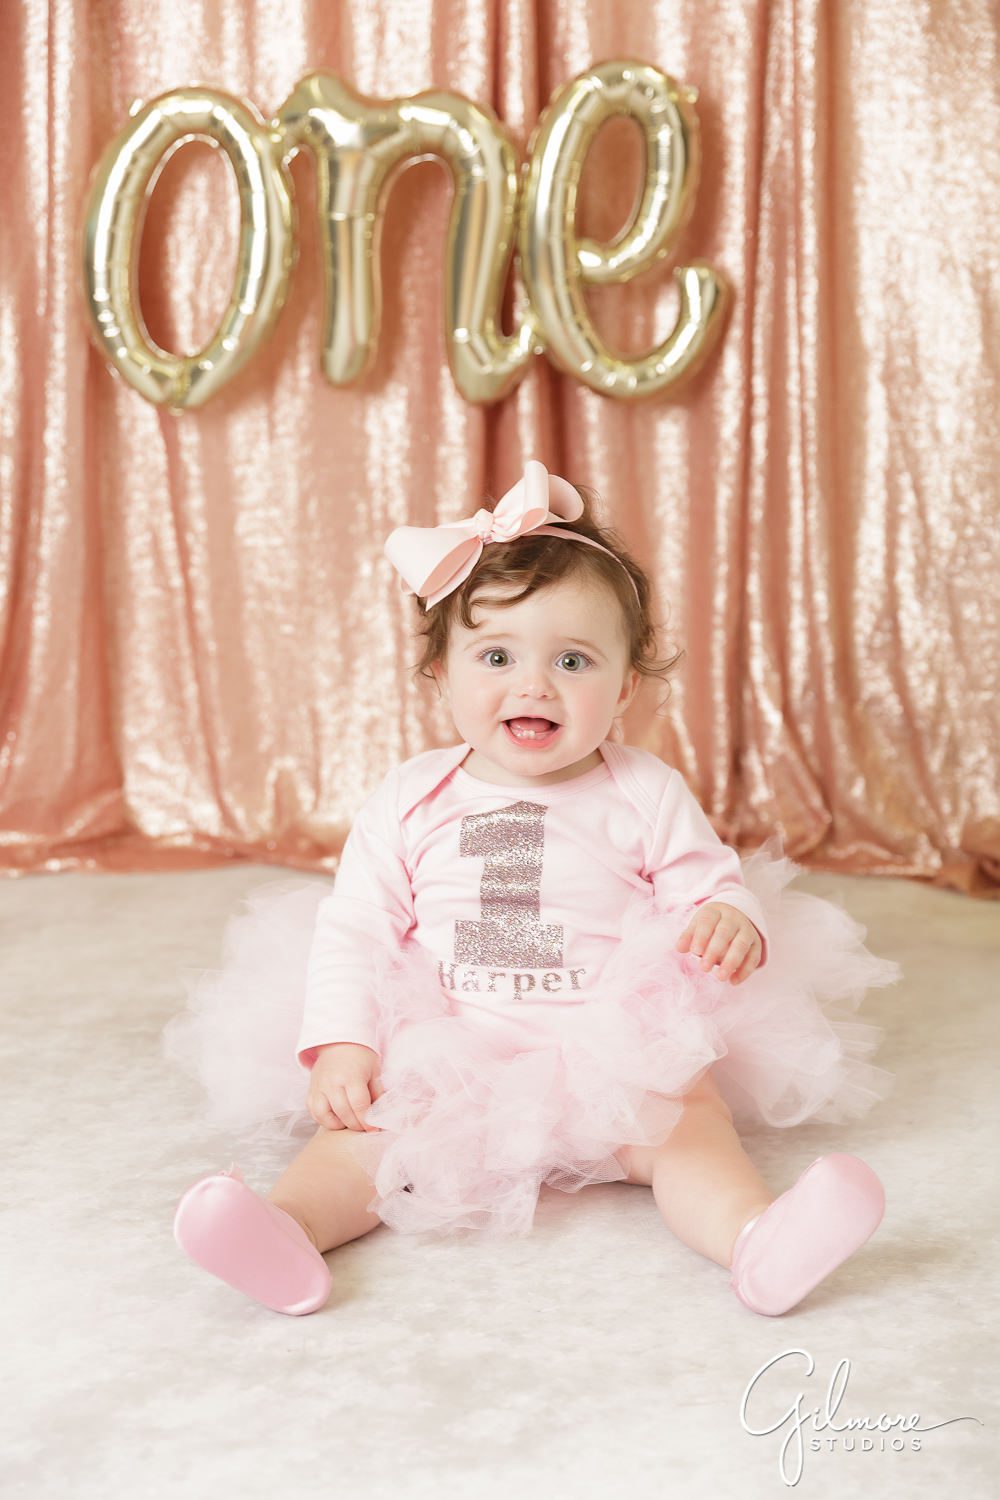 Ballerina Cake Smash Session, one year old, baby girl, first birthday, 1st bday, sign, props, skirt, tutu, outfit, pink, white, drapes, backdrop